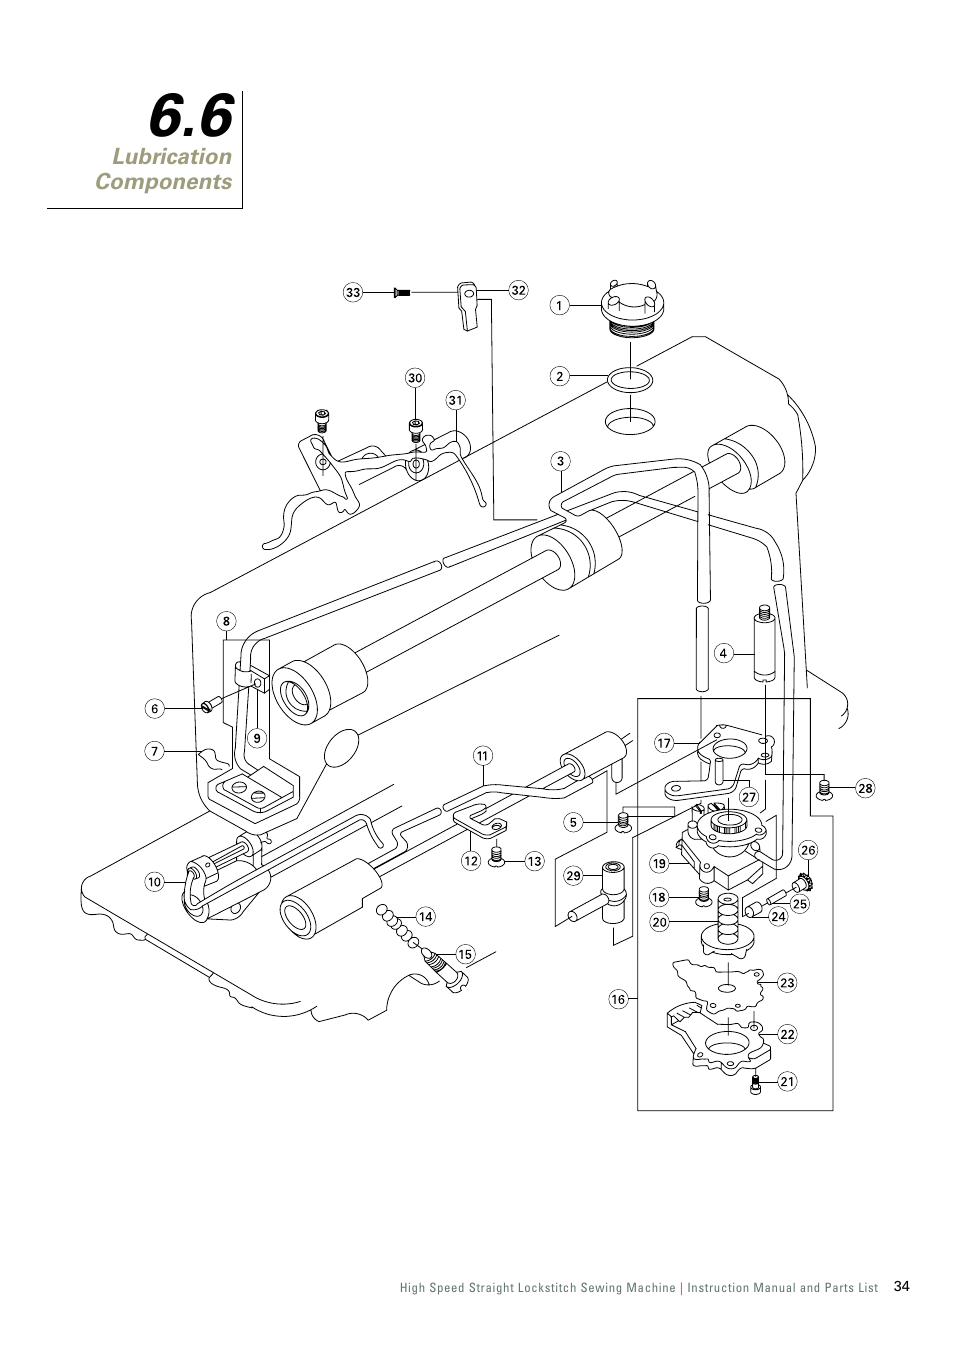 6 lubrication components | SINGER 191D-30 User Manual | Page 37 / 45